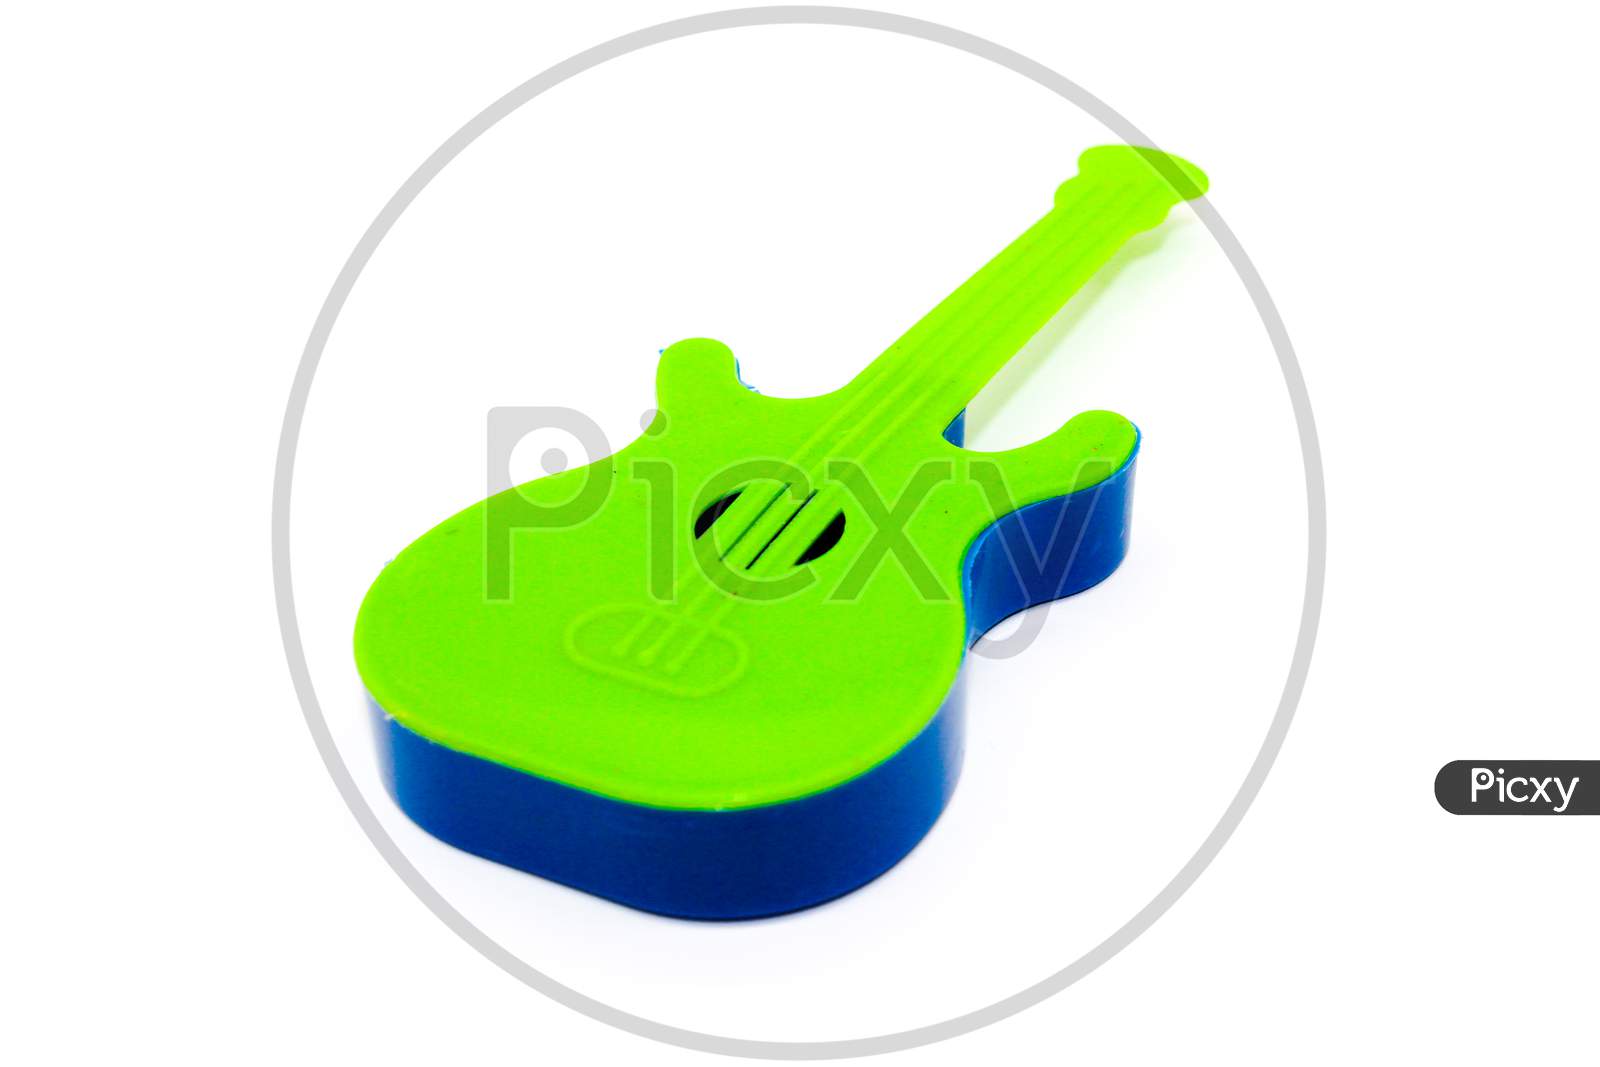 Toy Guitar On White Background With Selective Focus